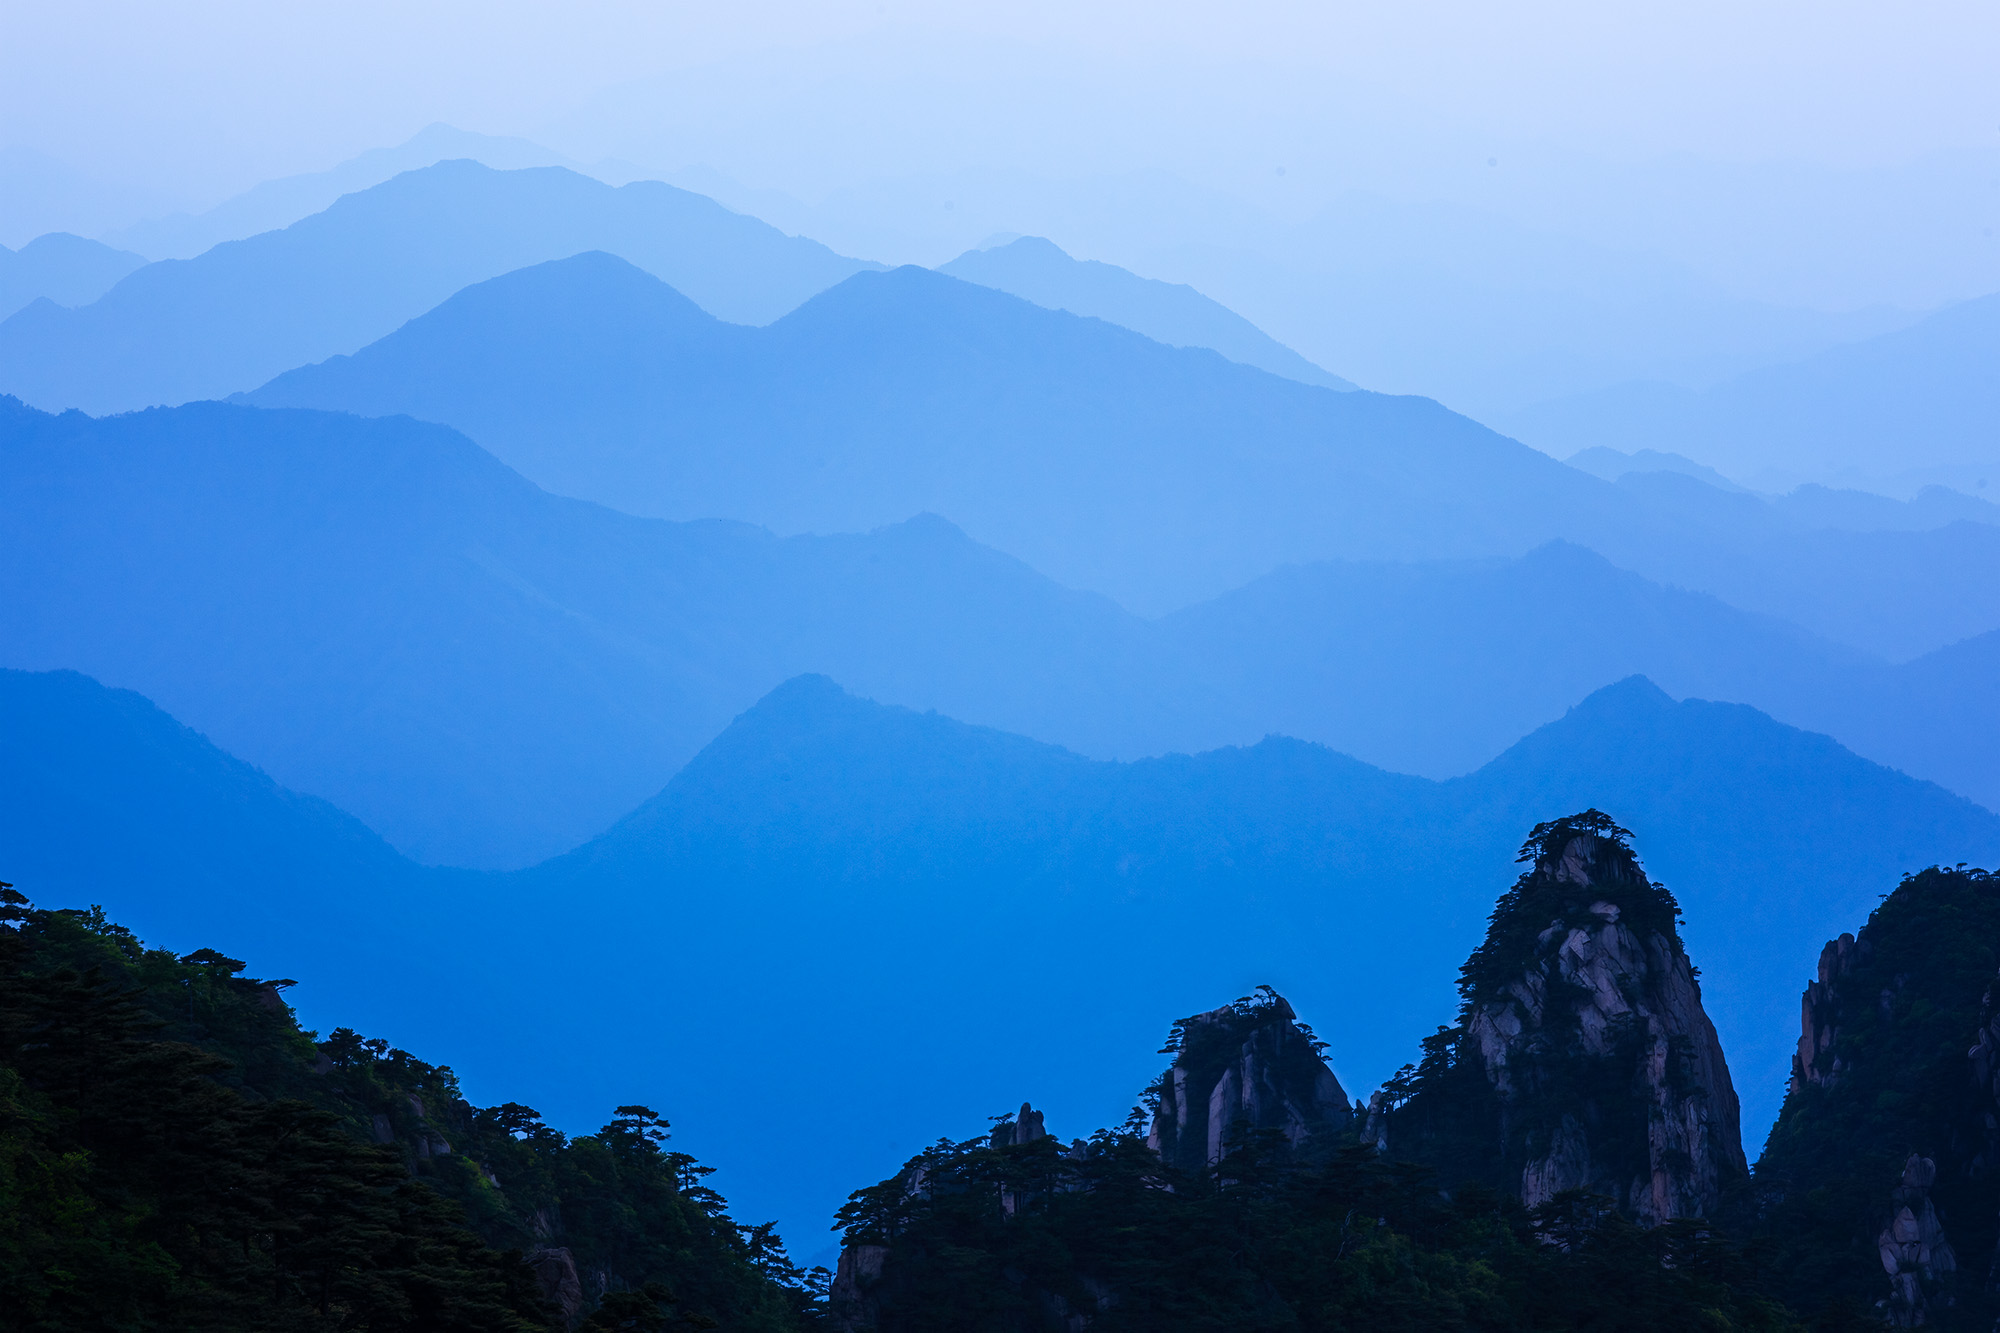 This image, from Mount Huangshan in China, unveils an enigmatic landscape. Against a misty blue sky, only the outlines of several...